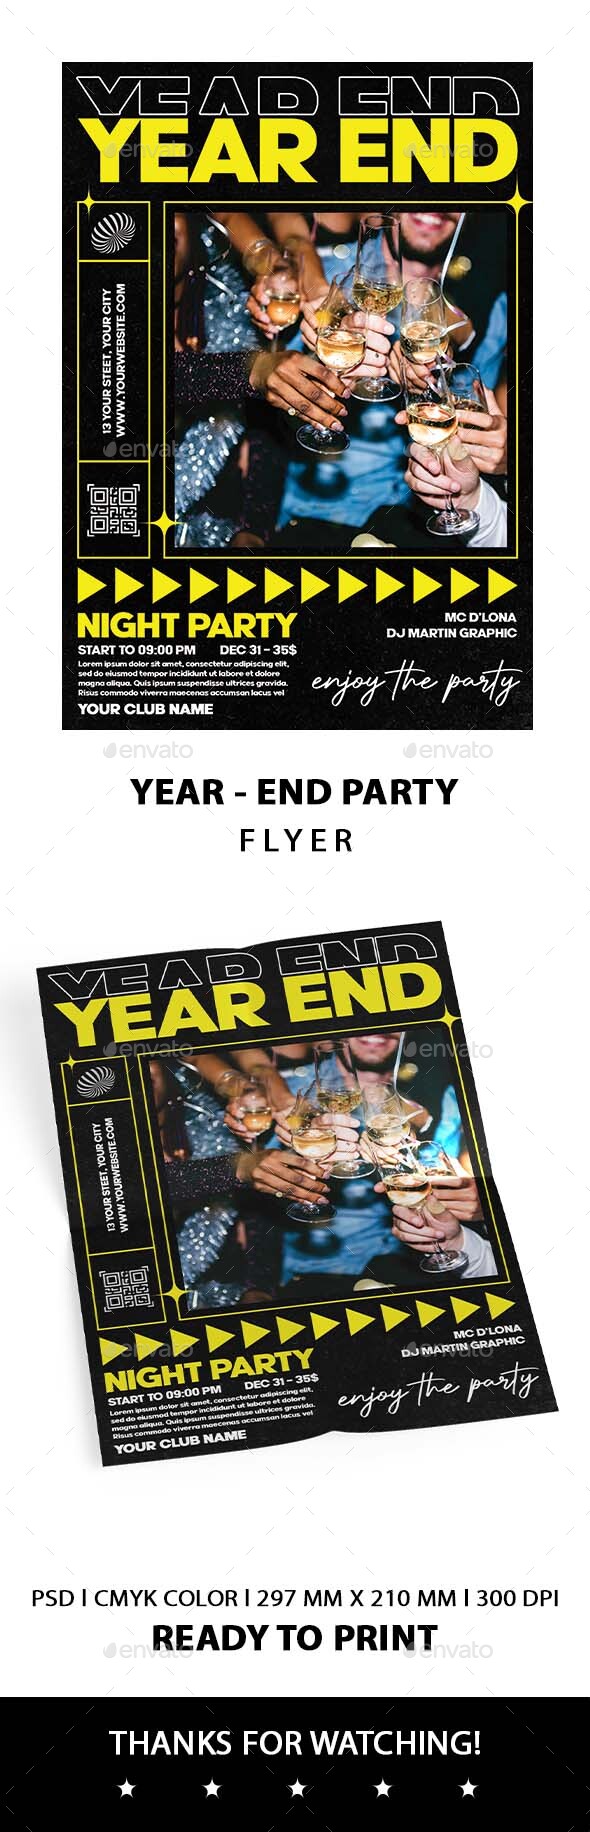 [DOWNLOAD]Year End Party Flyer